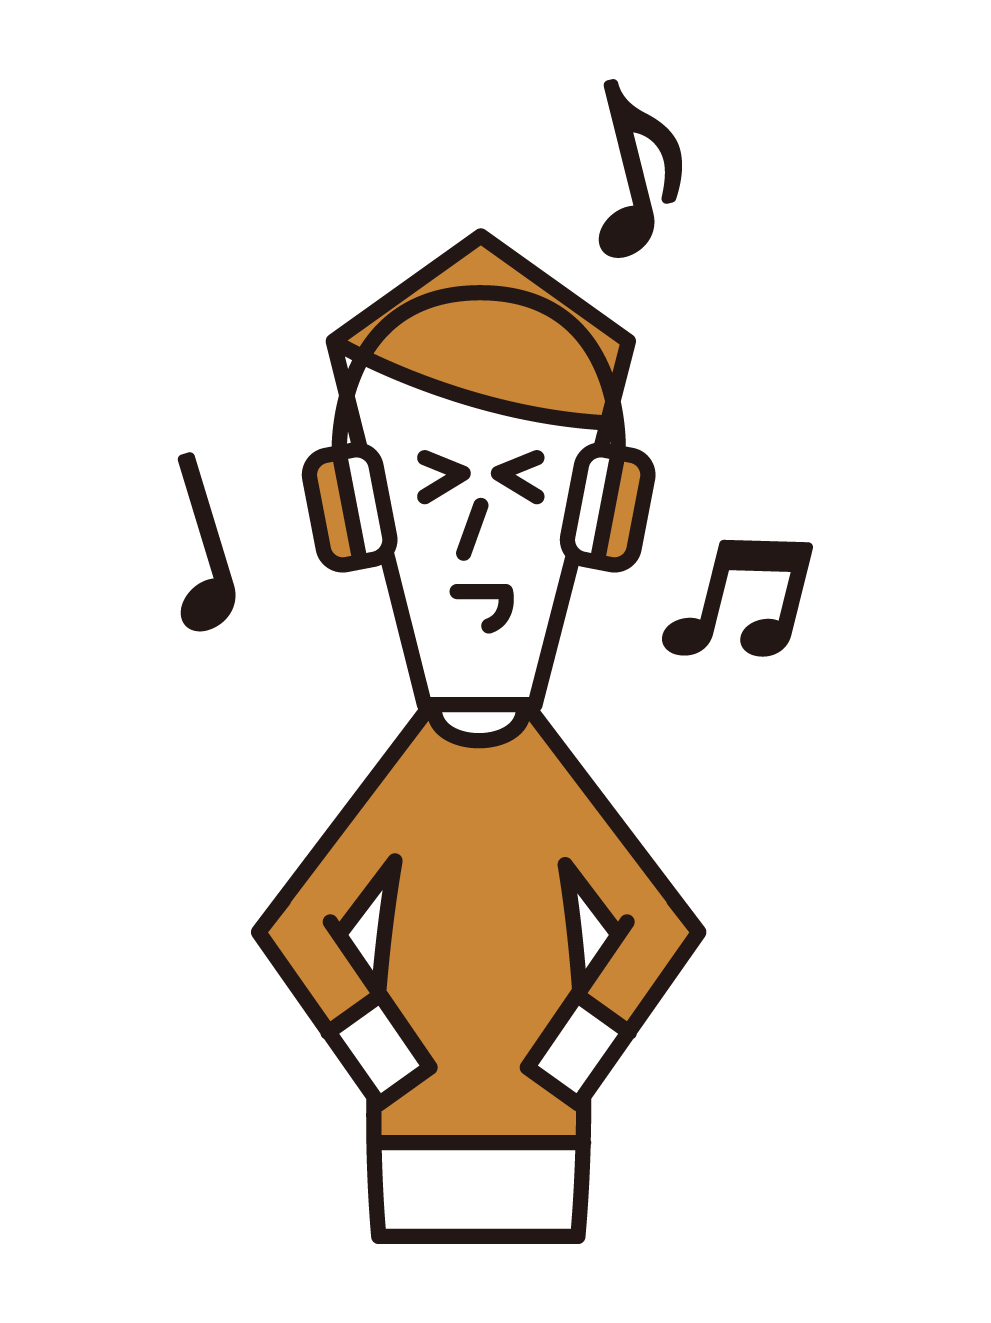 Illustration of a man listening to music with headphones